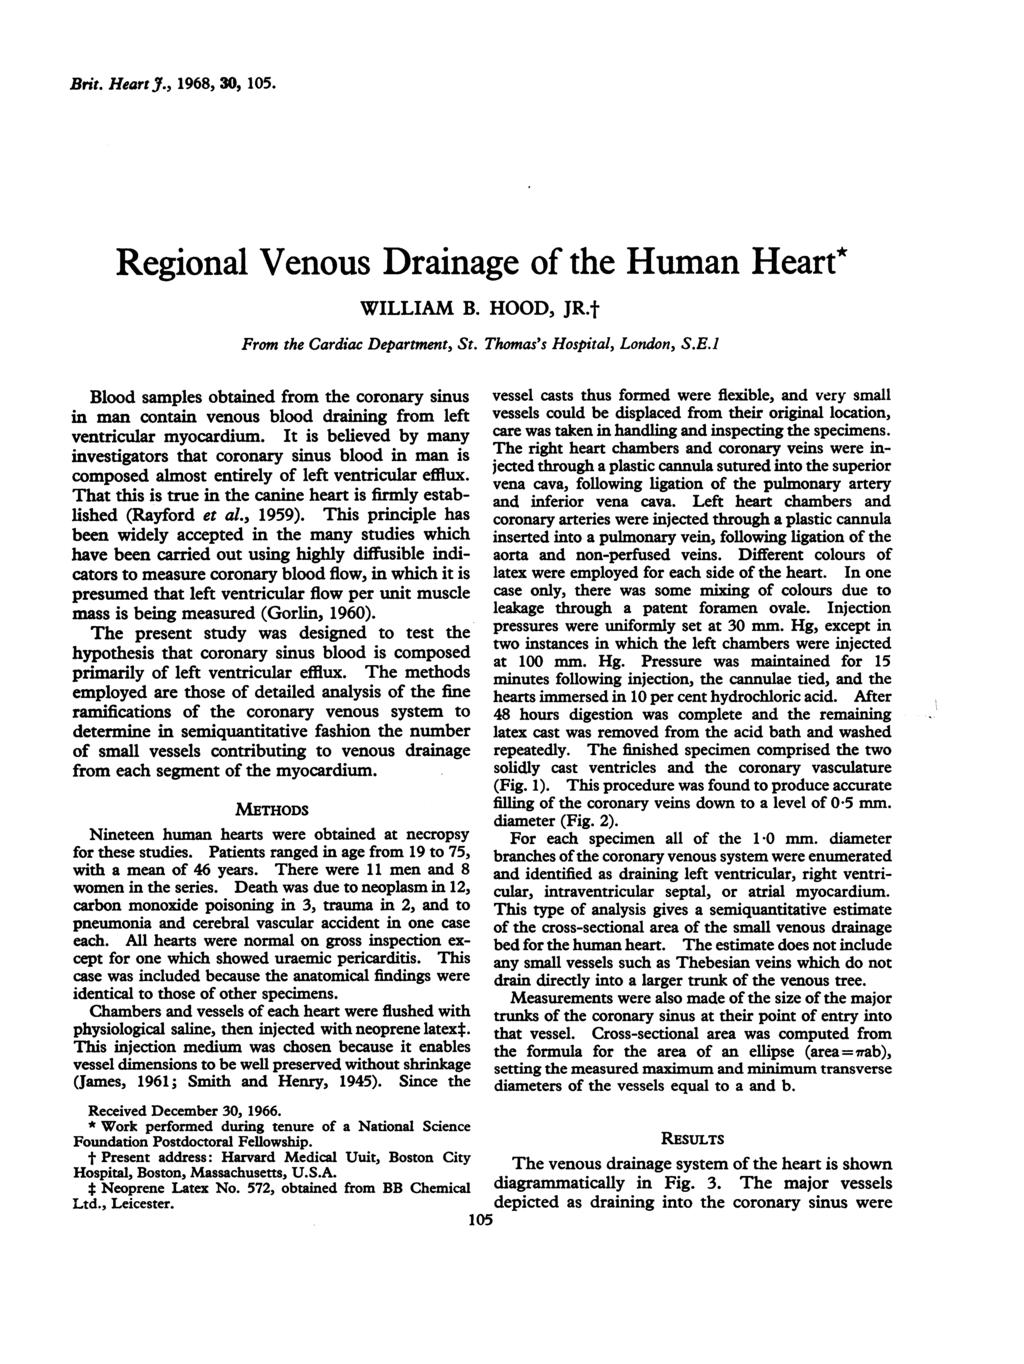 Brit. HeartyJ., 1968, 30, 105. Regional Venous Drainage of the Human Heart* WILLIAM B. HOOD, JR.t From the Cardiac Department, St. Thomas's Hospital, London, S.E.